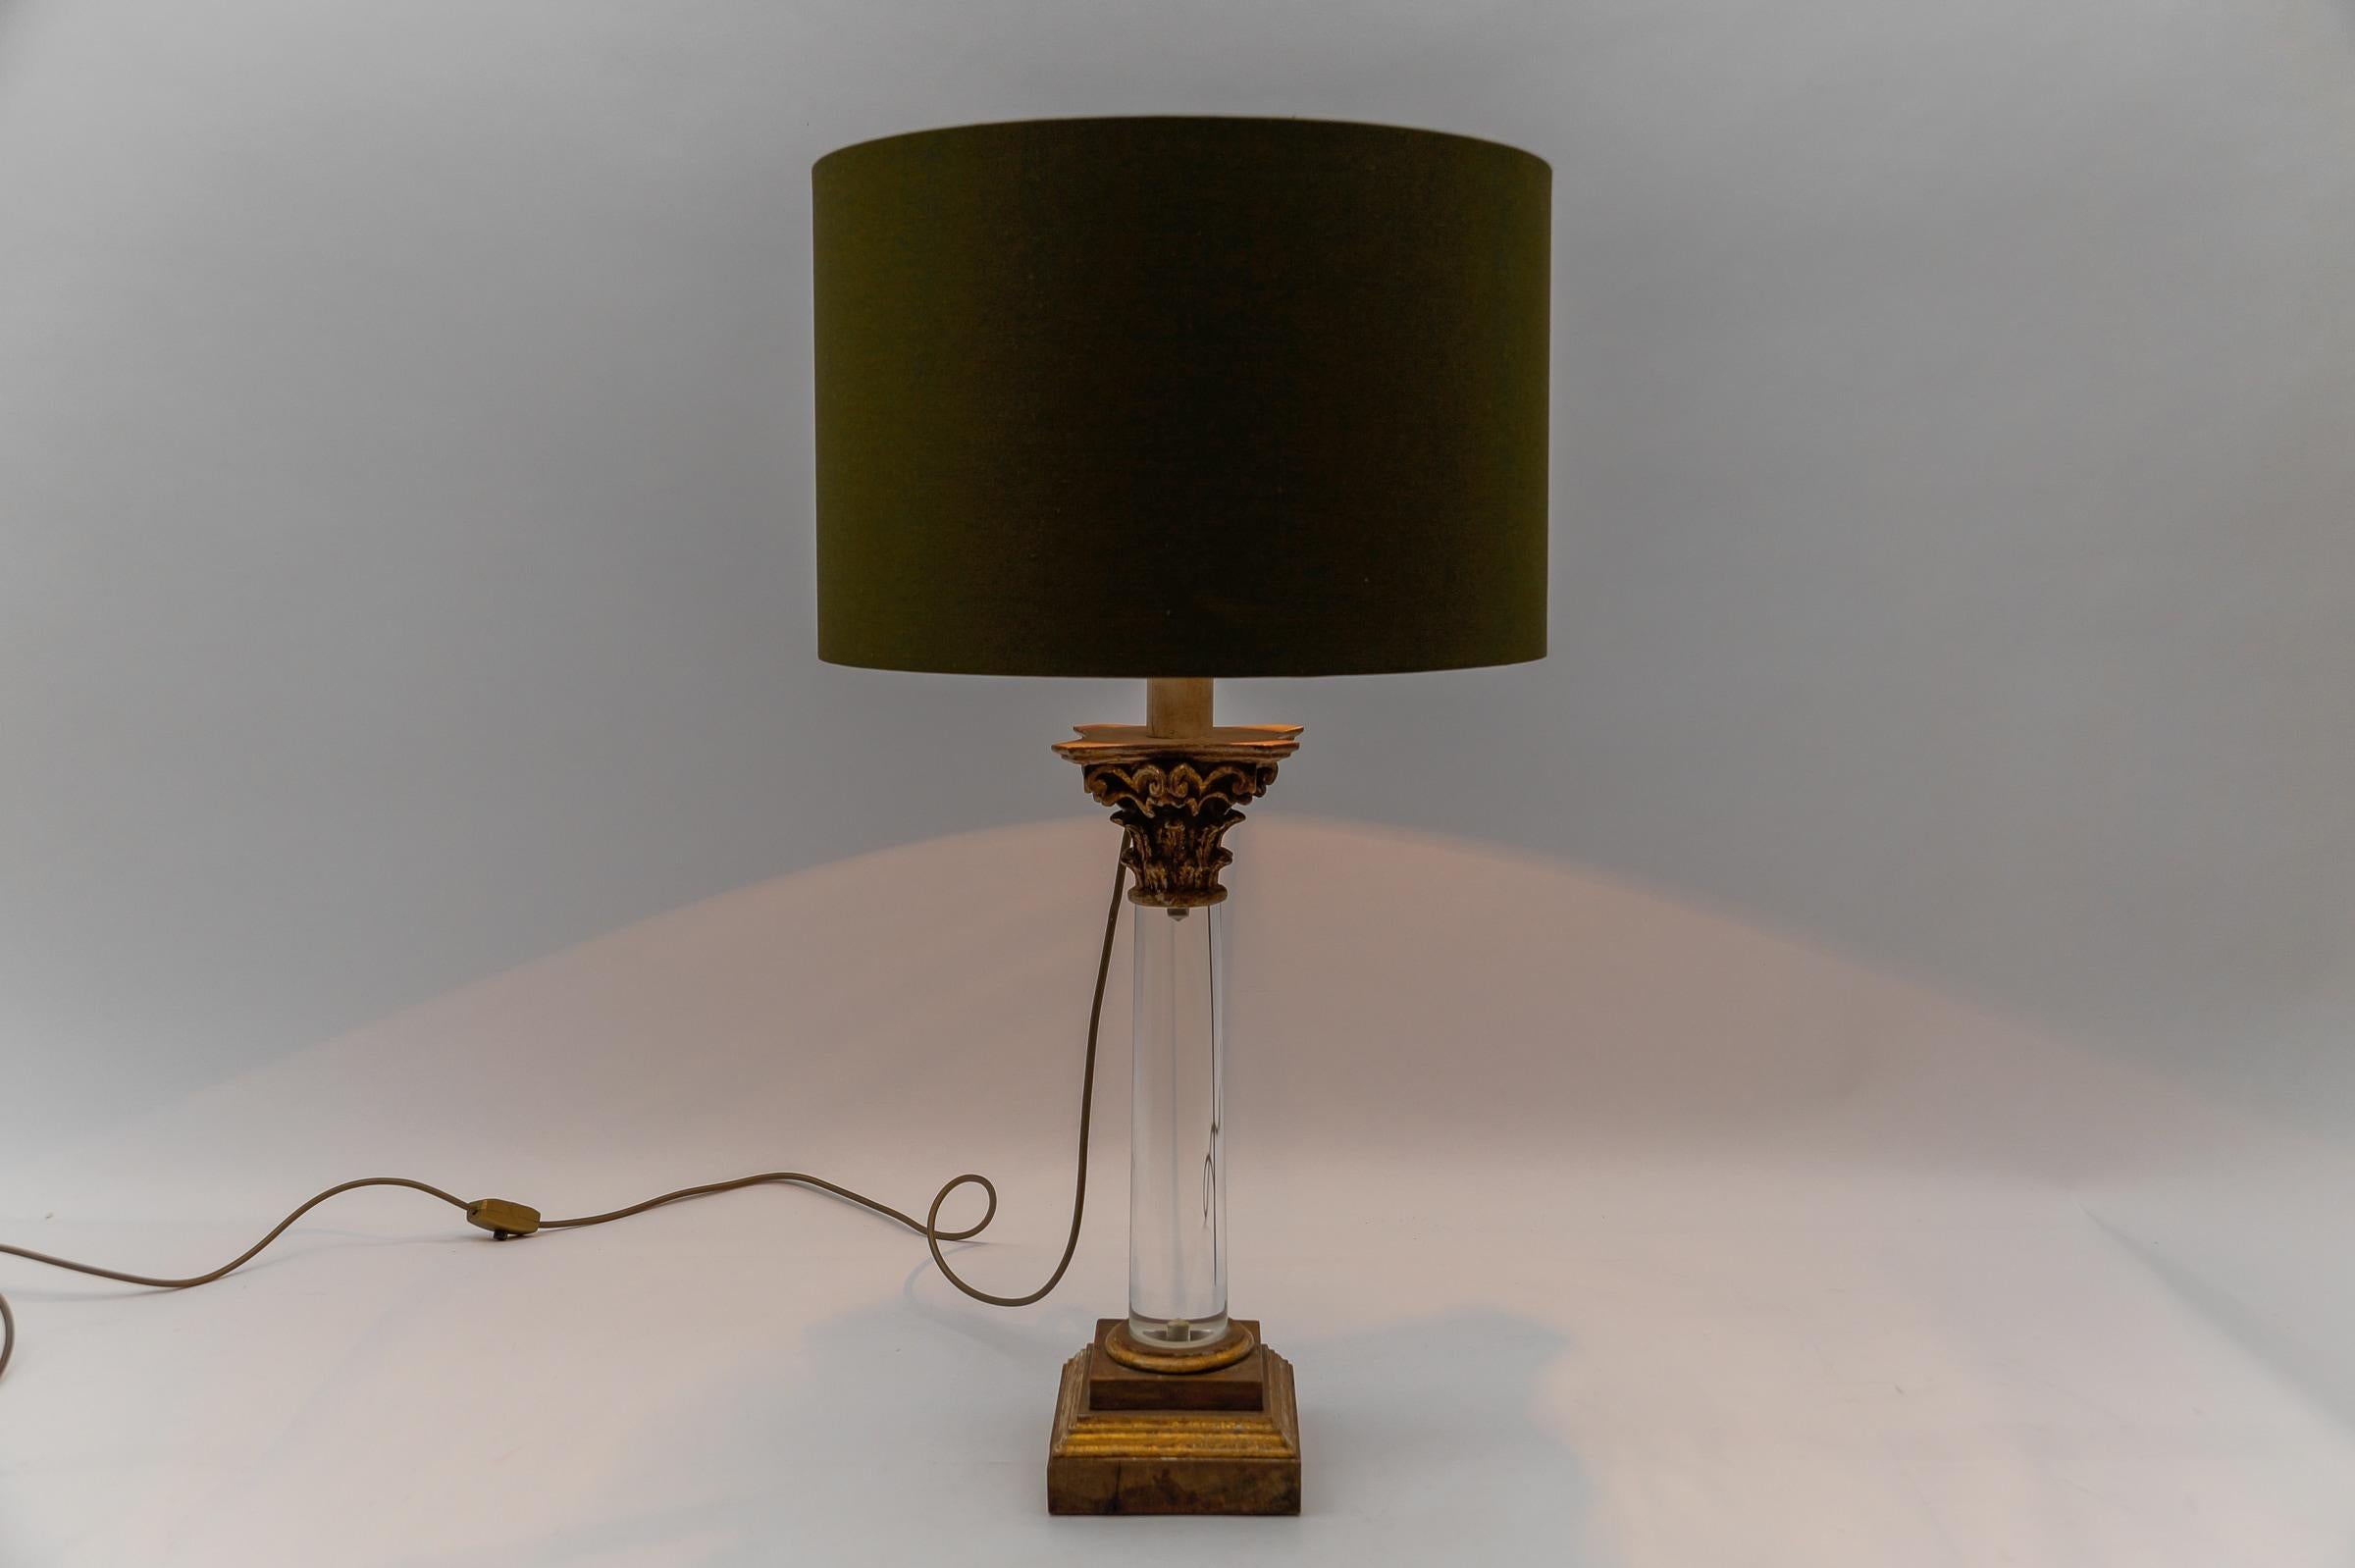 Italian Mid-Century Modern Acrylic & Wood Table Lamp Base, 1960s Italy

The lampshade is to illustrate how the lamp base looks with a shade. The shade has a diameter of 17.71 in. (45 cm) and height 11.41 in. (29 cm).

Dimensions
Diameter: 7.08 in.